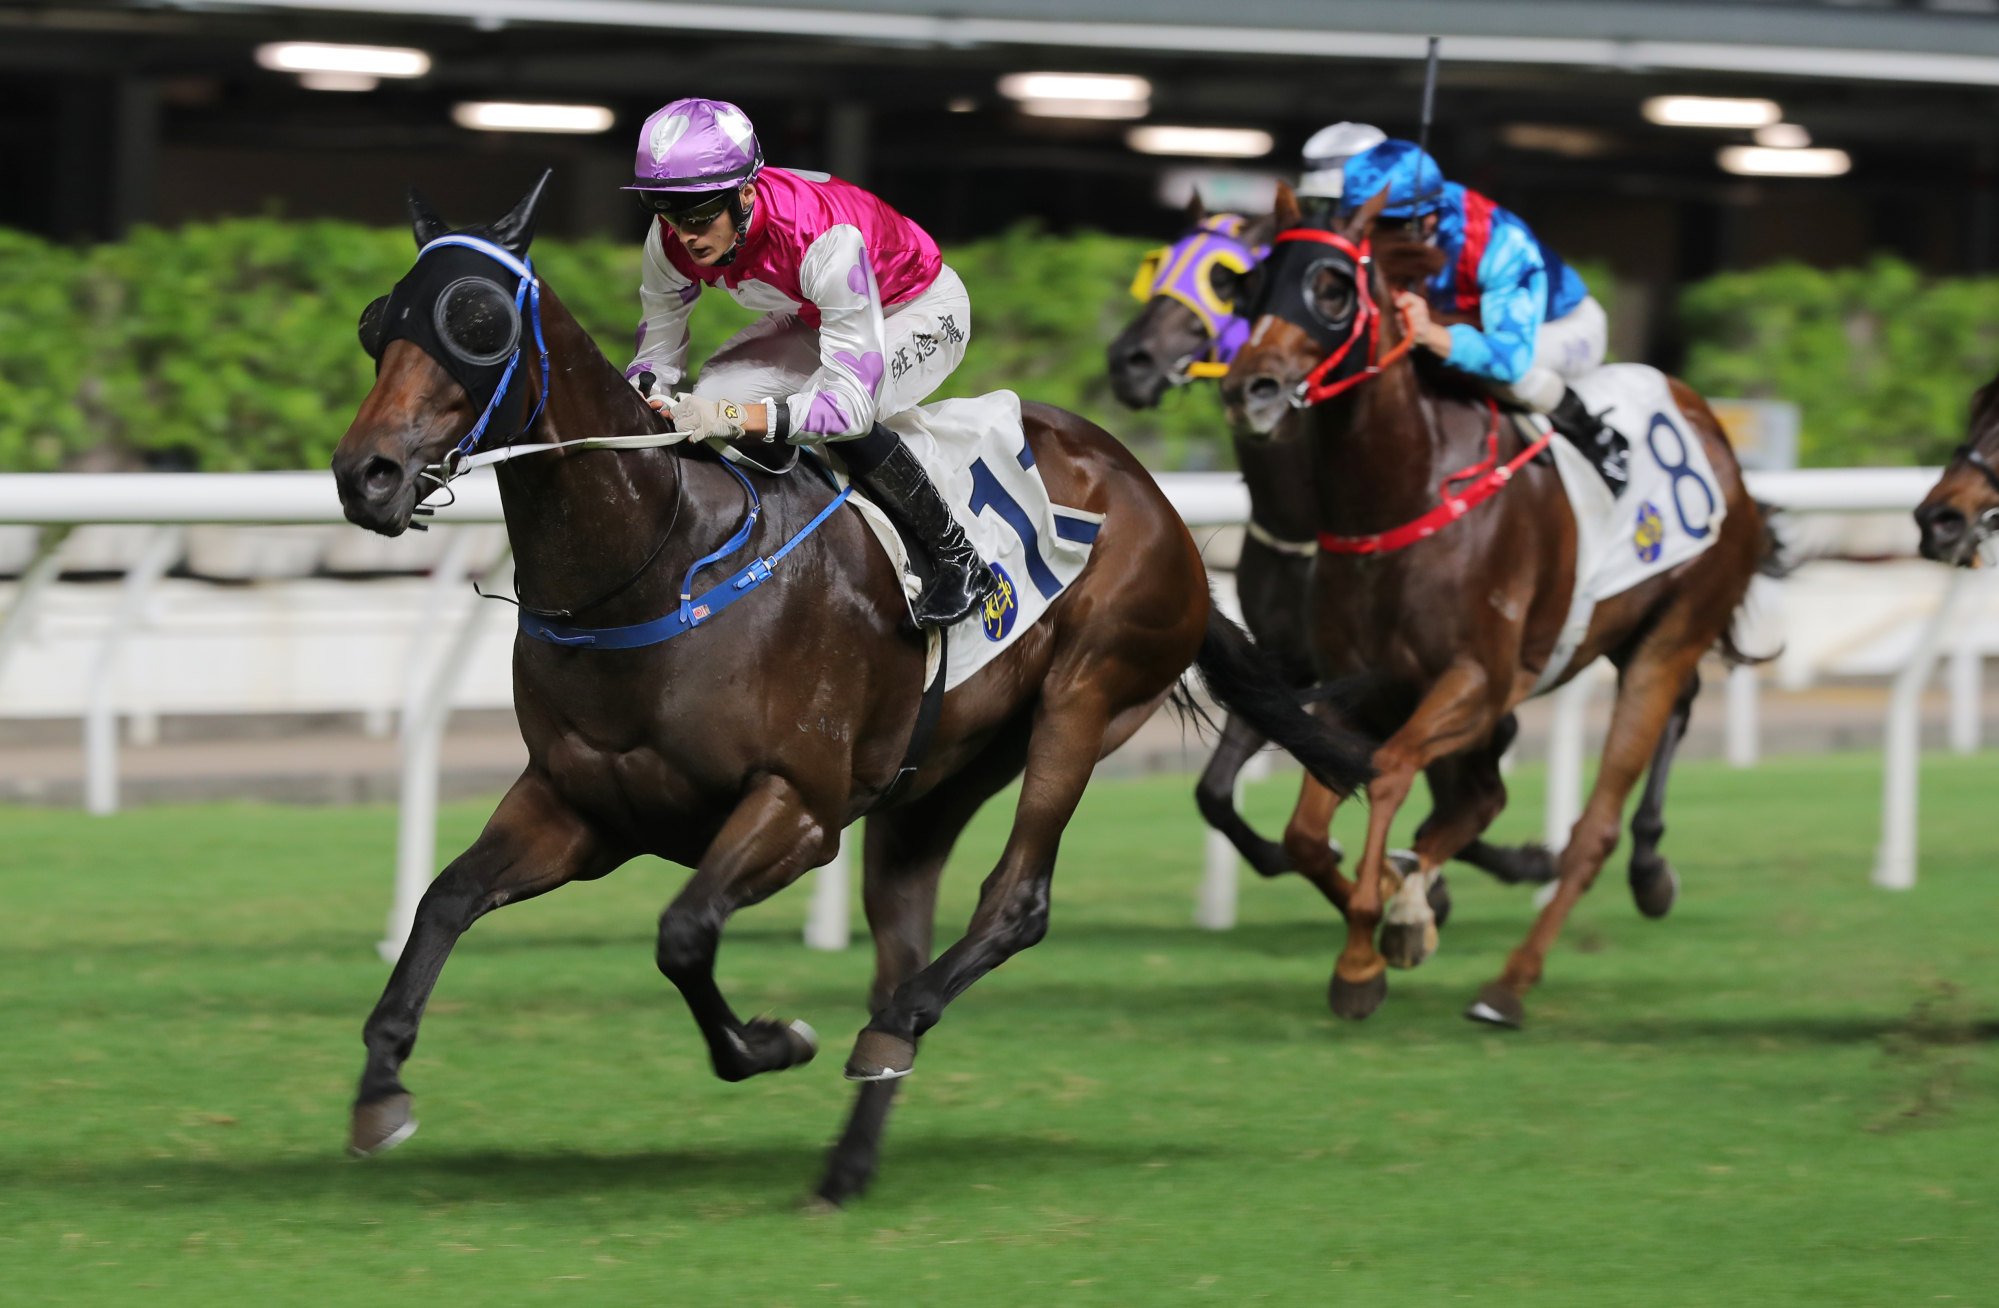 Harry Bentley rides M Unicorn to his wide-margin victory at Happy Valley on September 27.